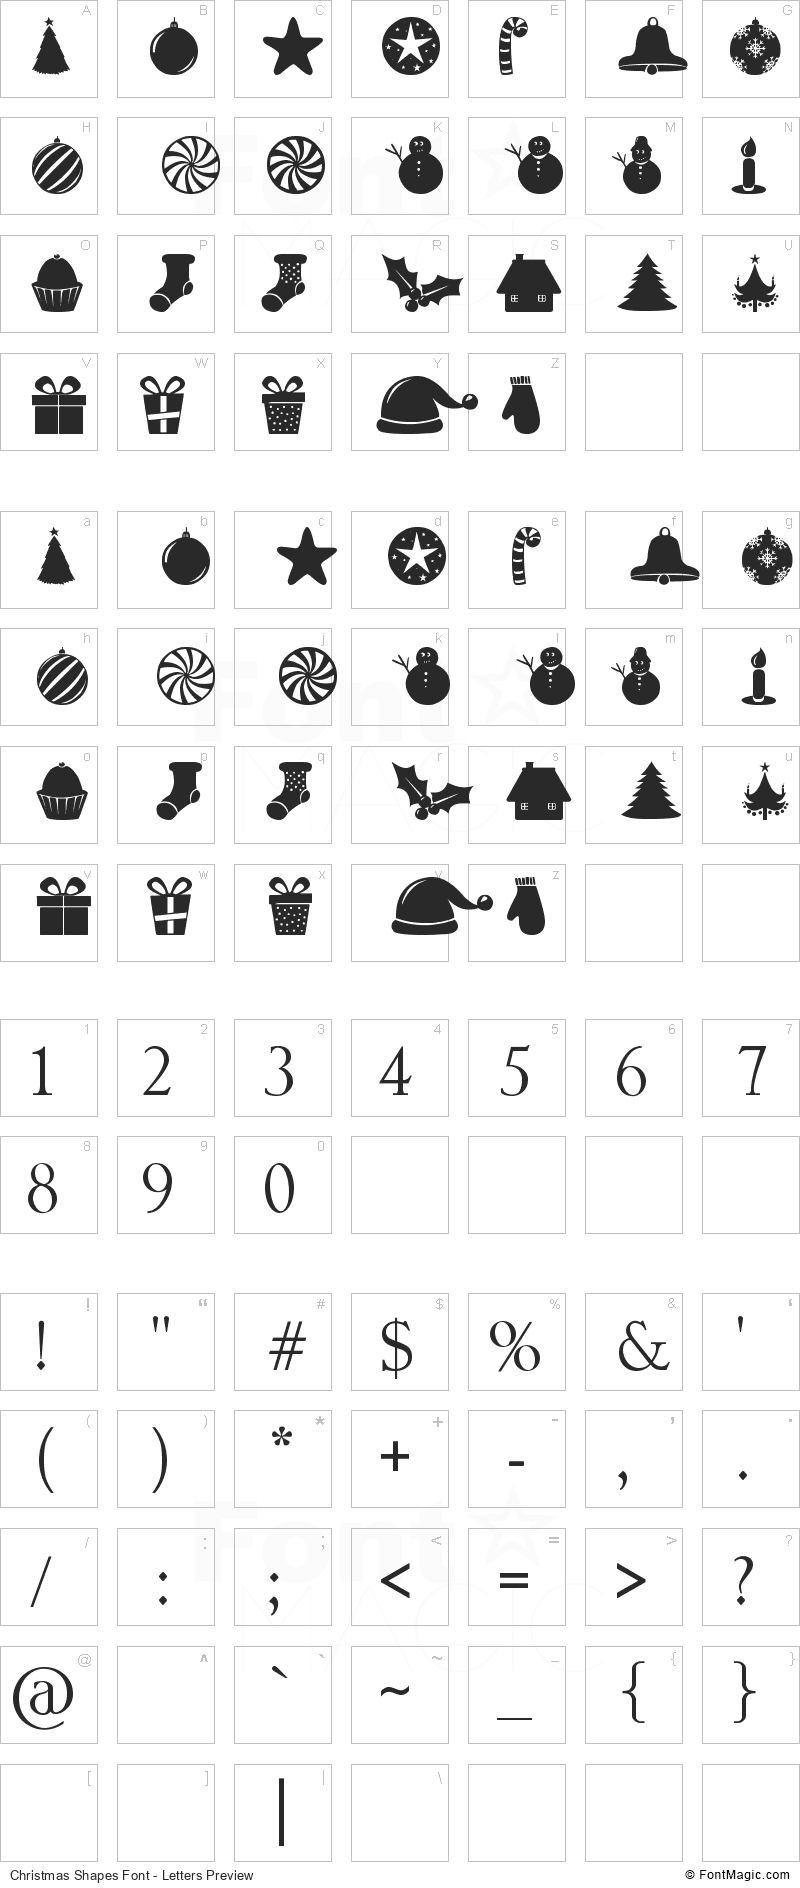 Christmas Shapes Font - All Latters Preview Chart